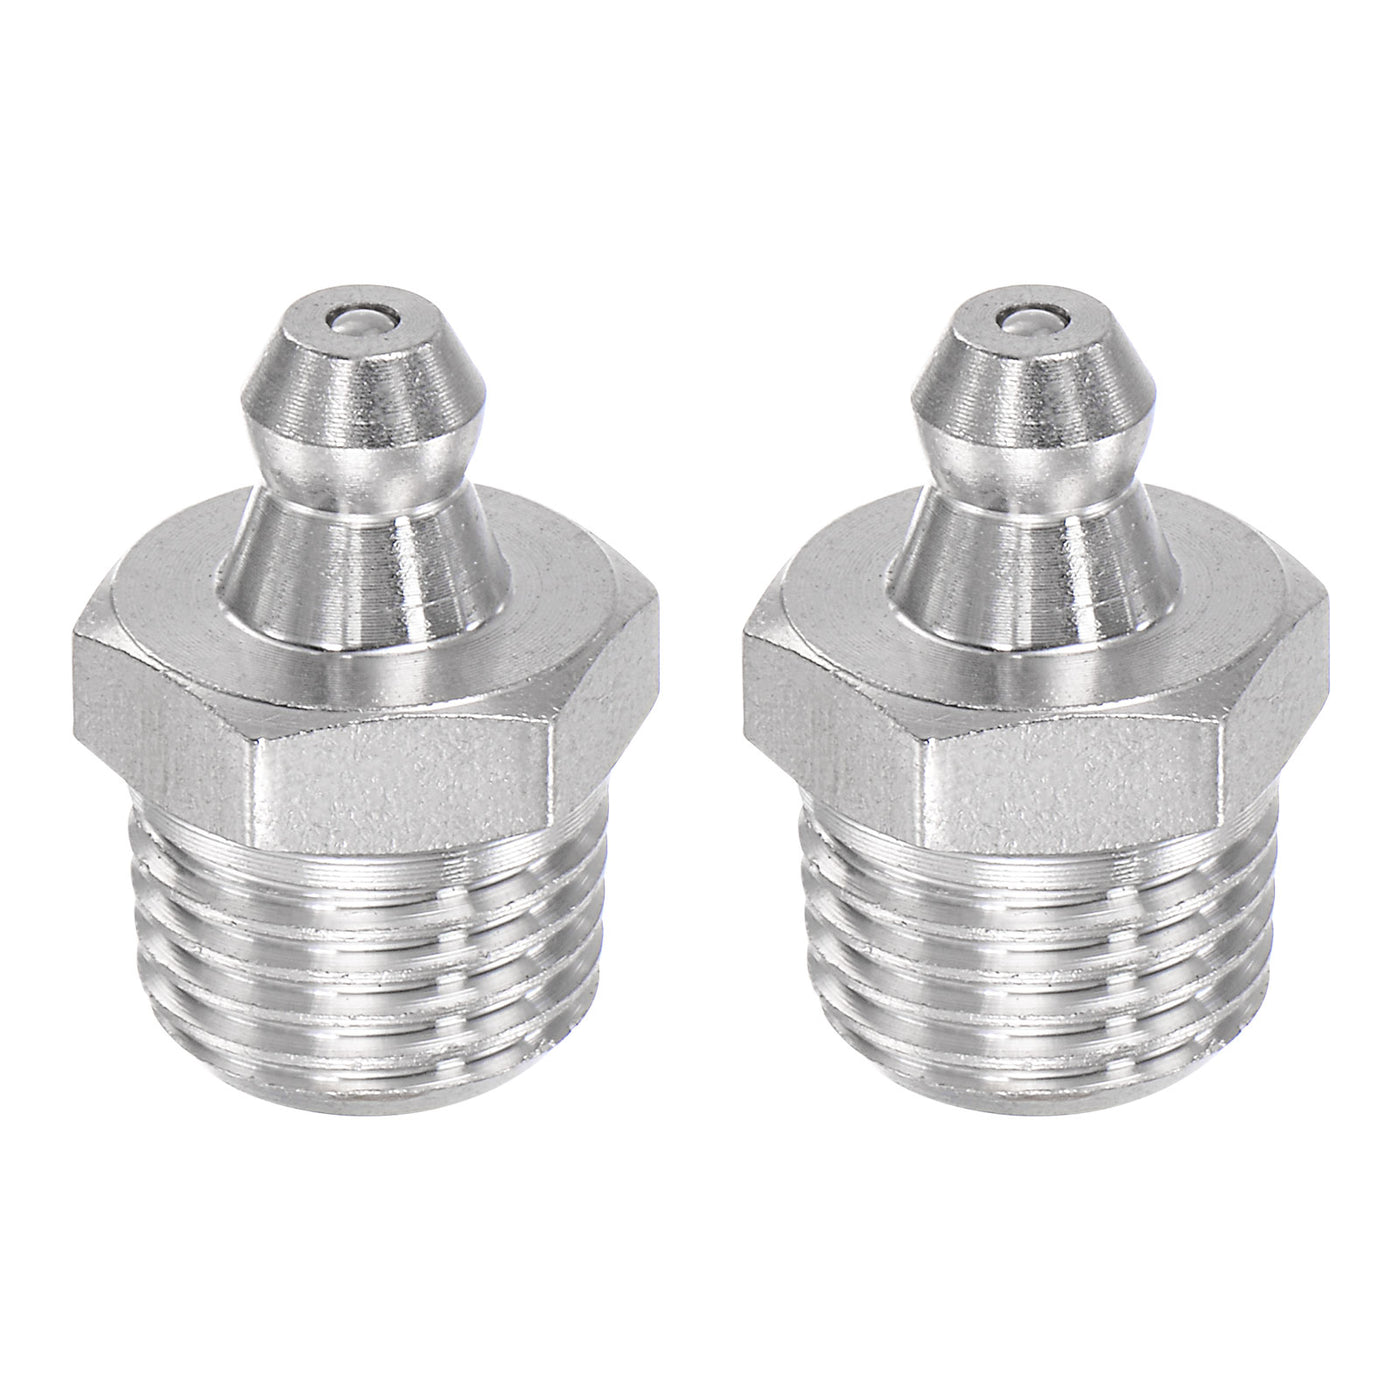 uxcell Uxcell 2Pcs Stainless Steel Straight Hydraulic Grease Fitting G1/4 Thread